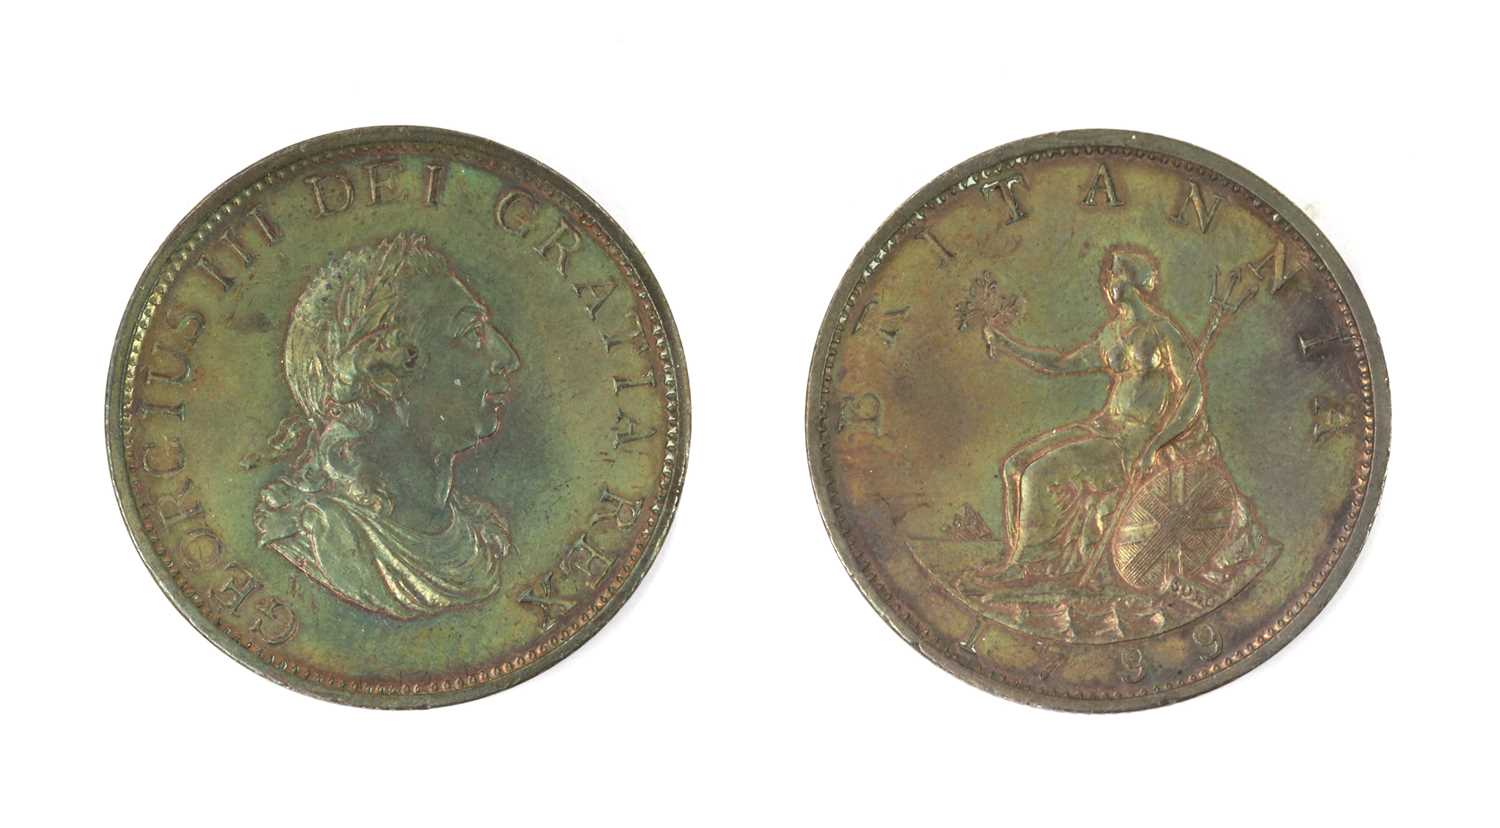 Lot 65 - Coins, Great Britain, George III (1760-1820)